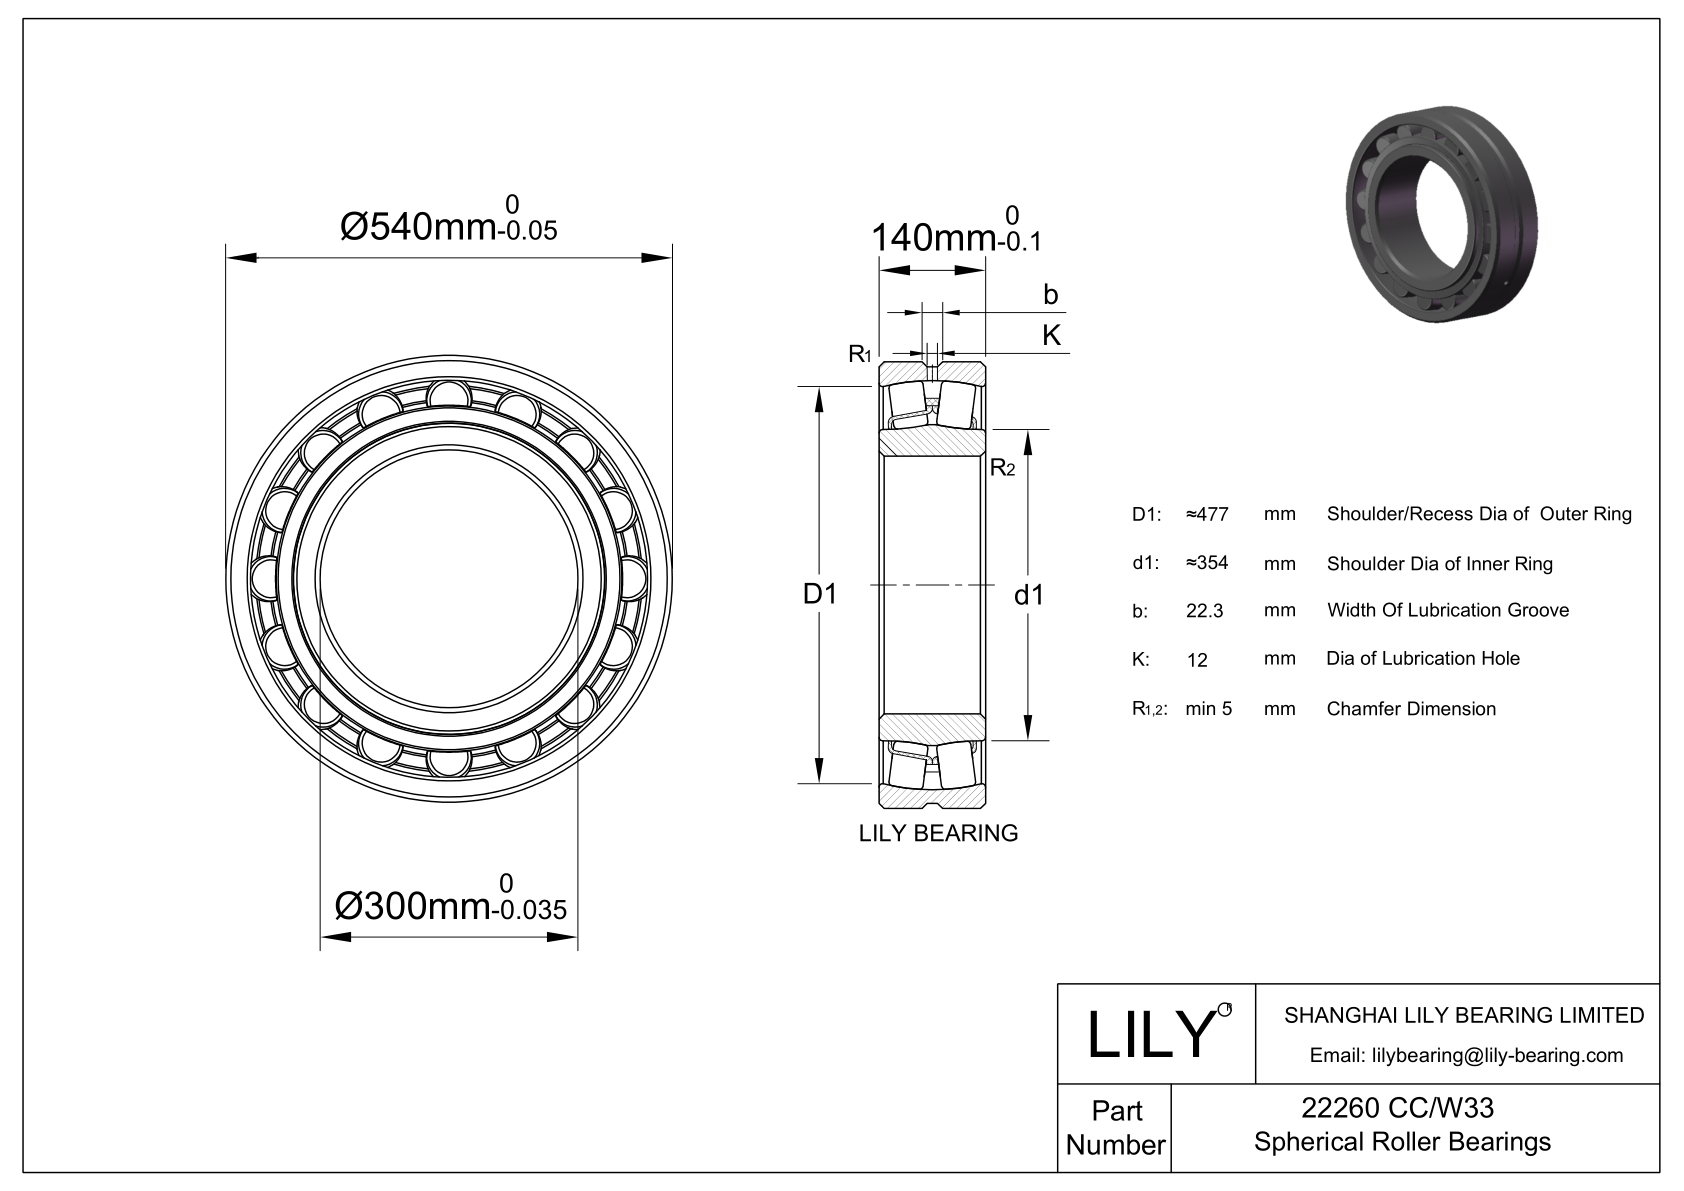 22260 CC/W33 Double Row Spherical Roller Bearing cad drawing